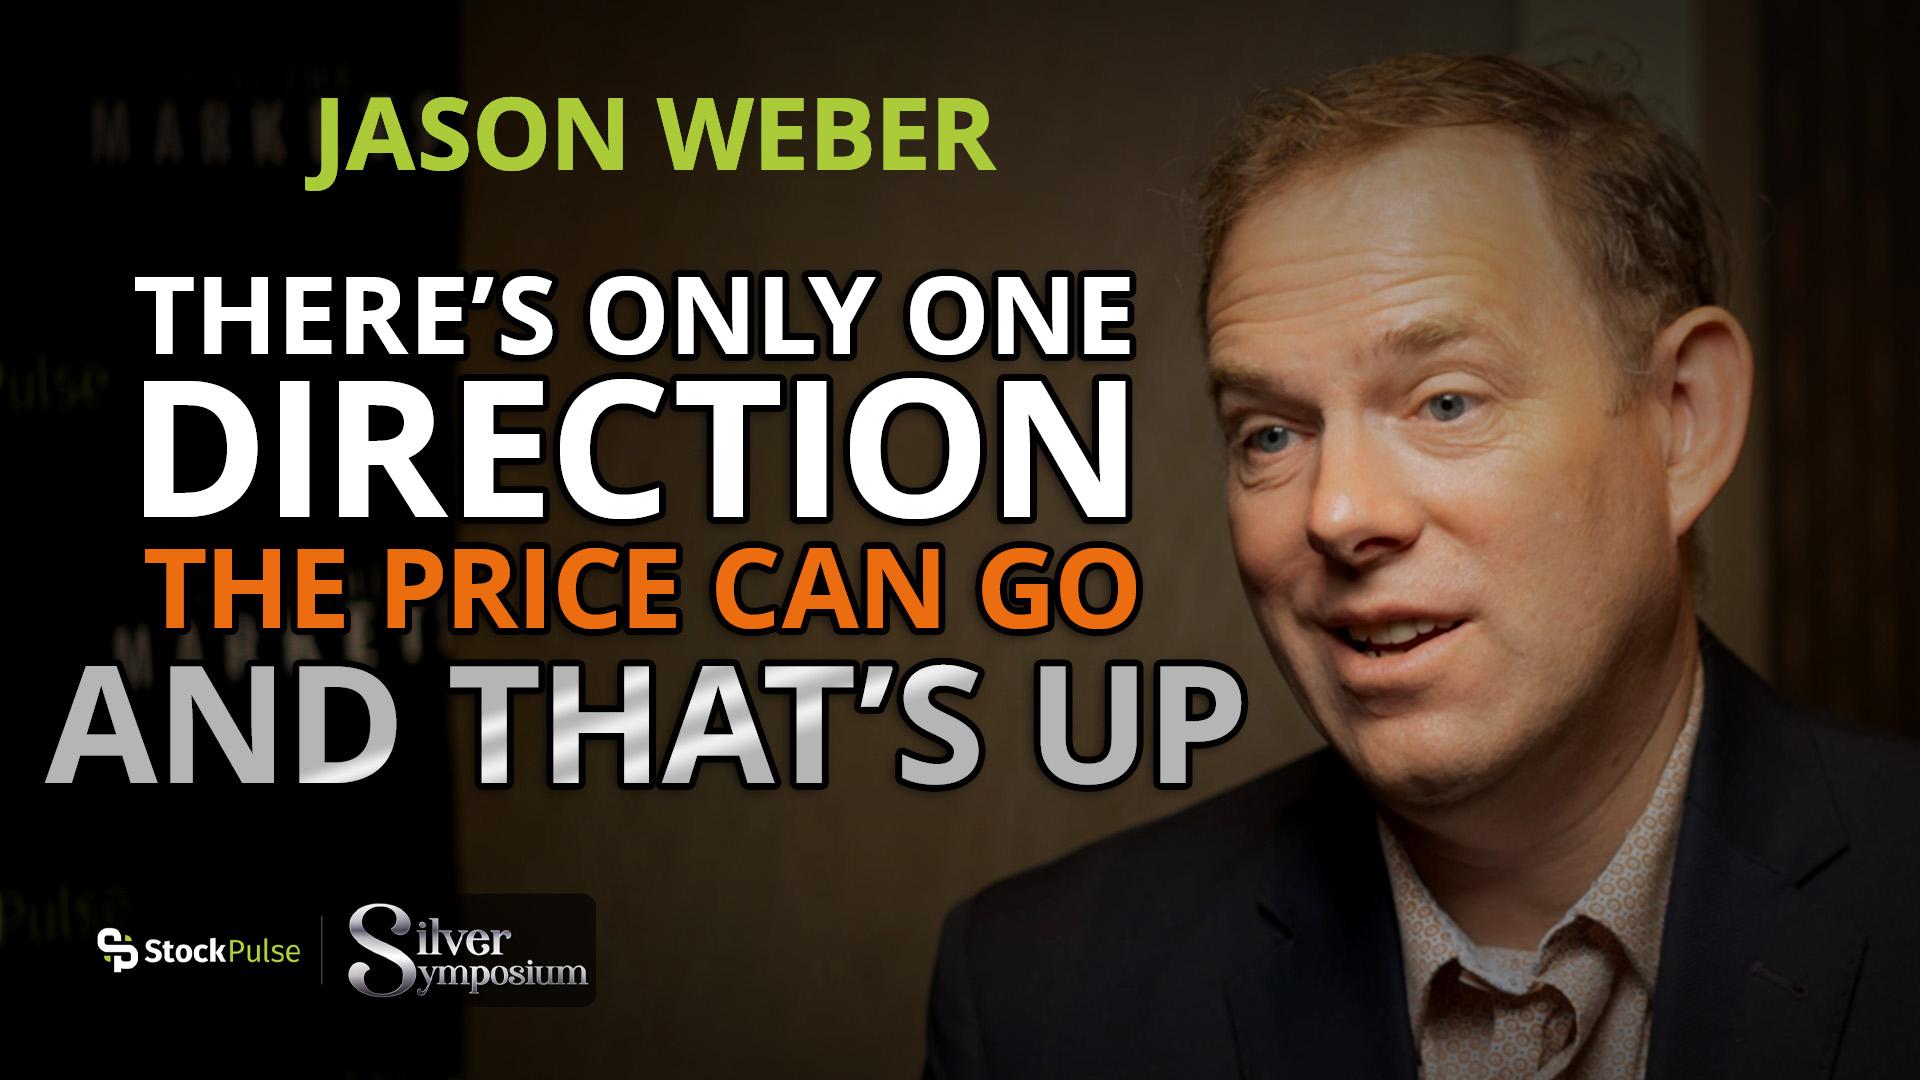 Jason Weber: There’s Only One Direction the Price Can Go and that’s Up